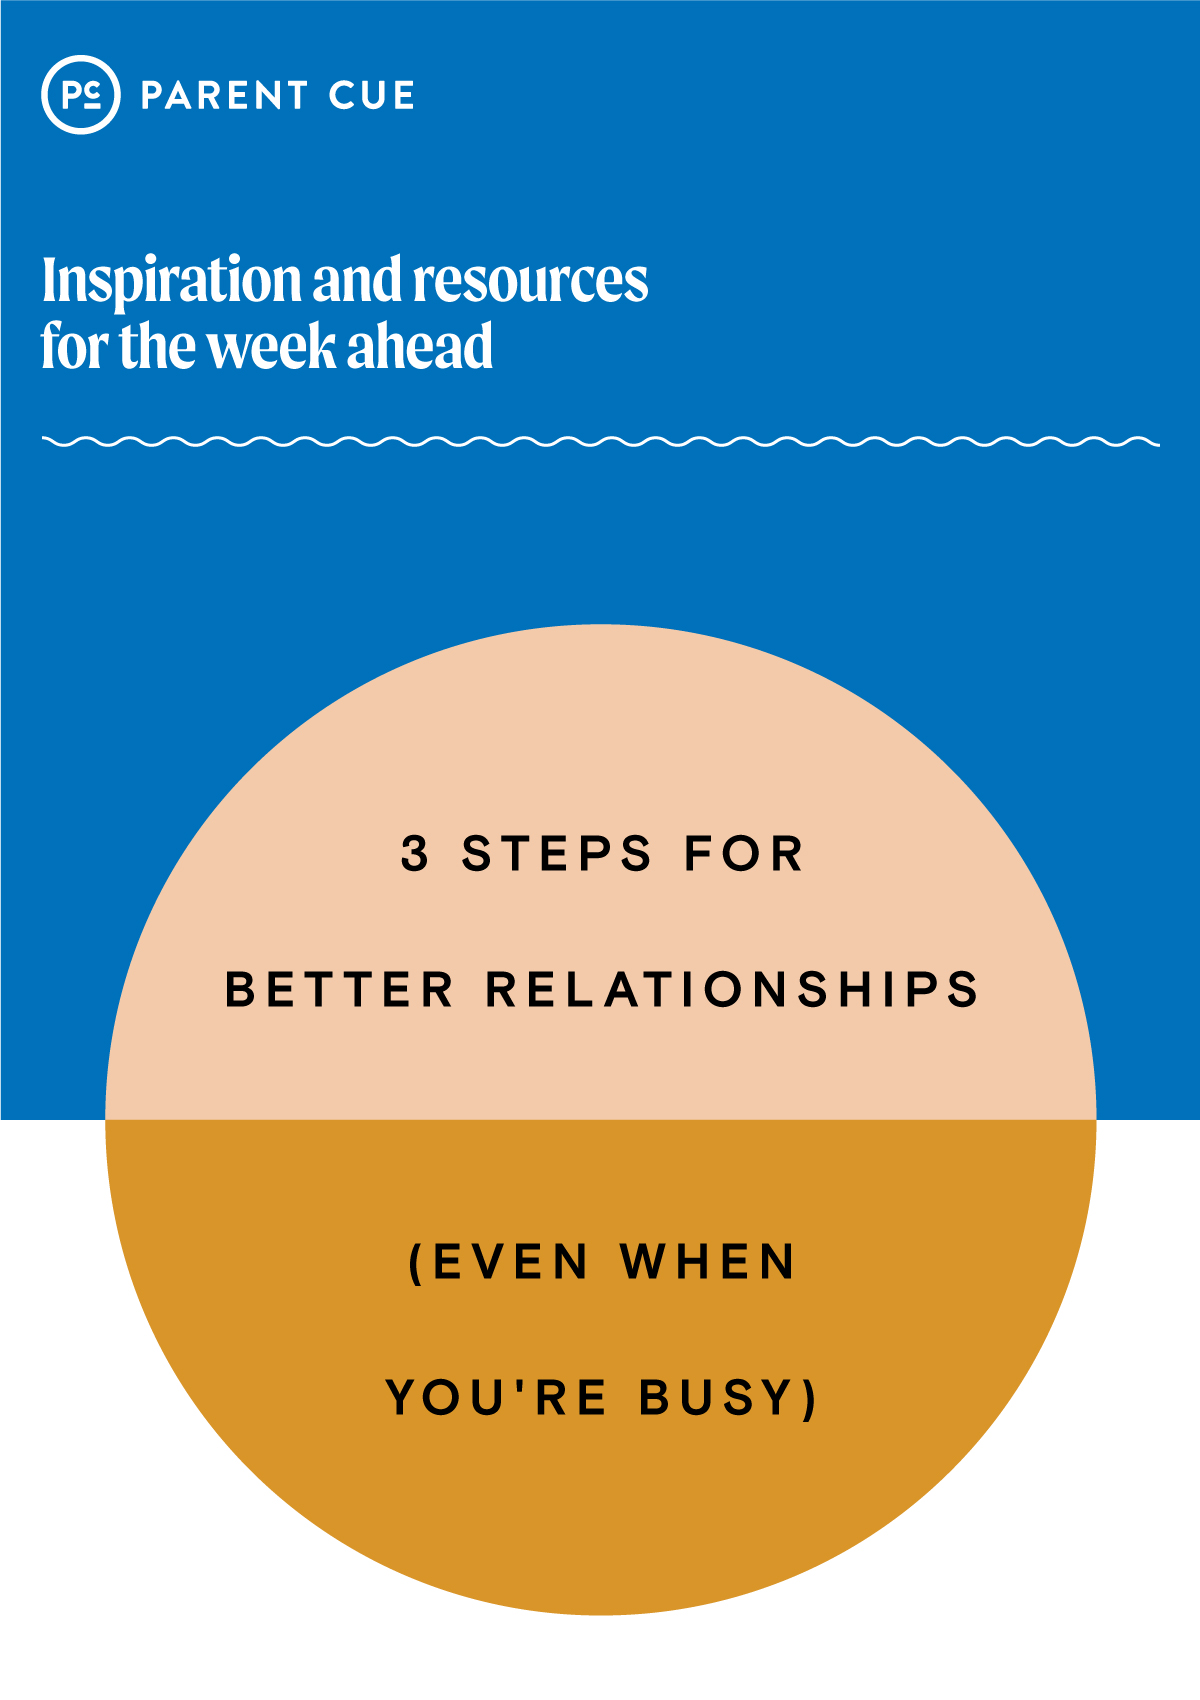 3 Steps for Better Relationships (Even When You're Busy)